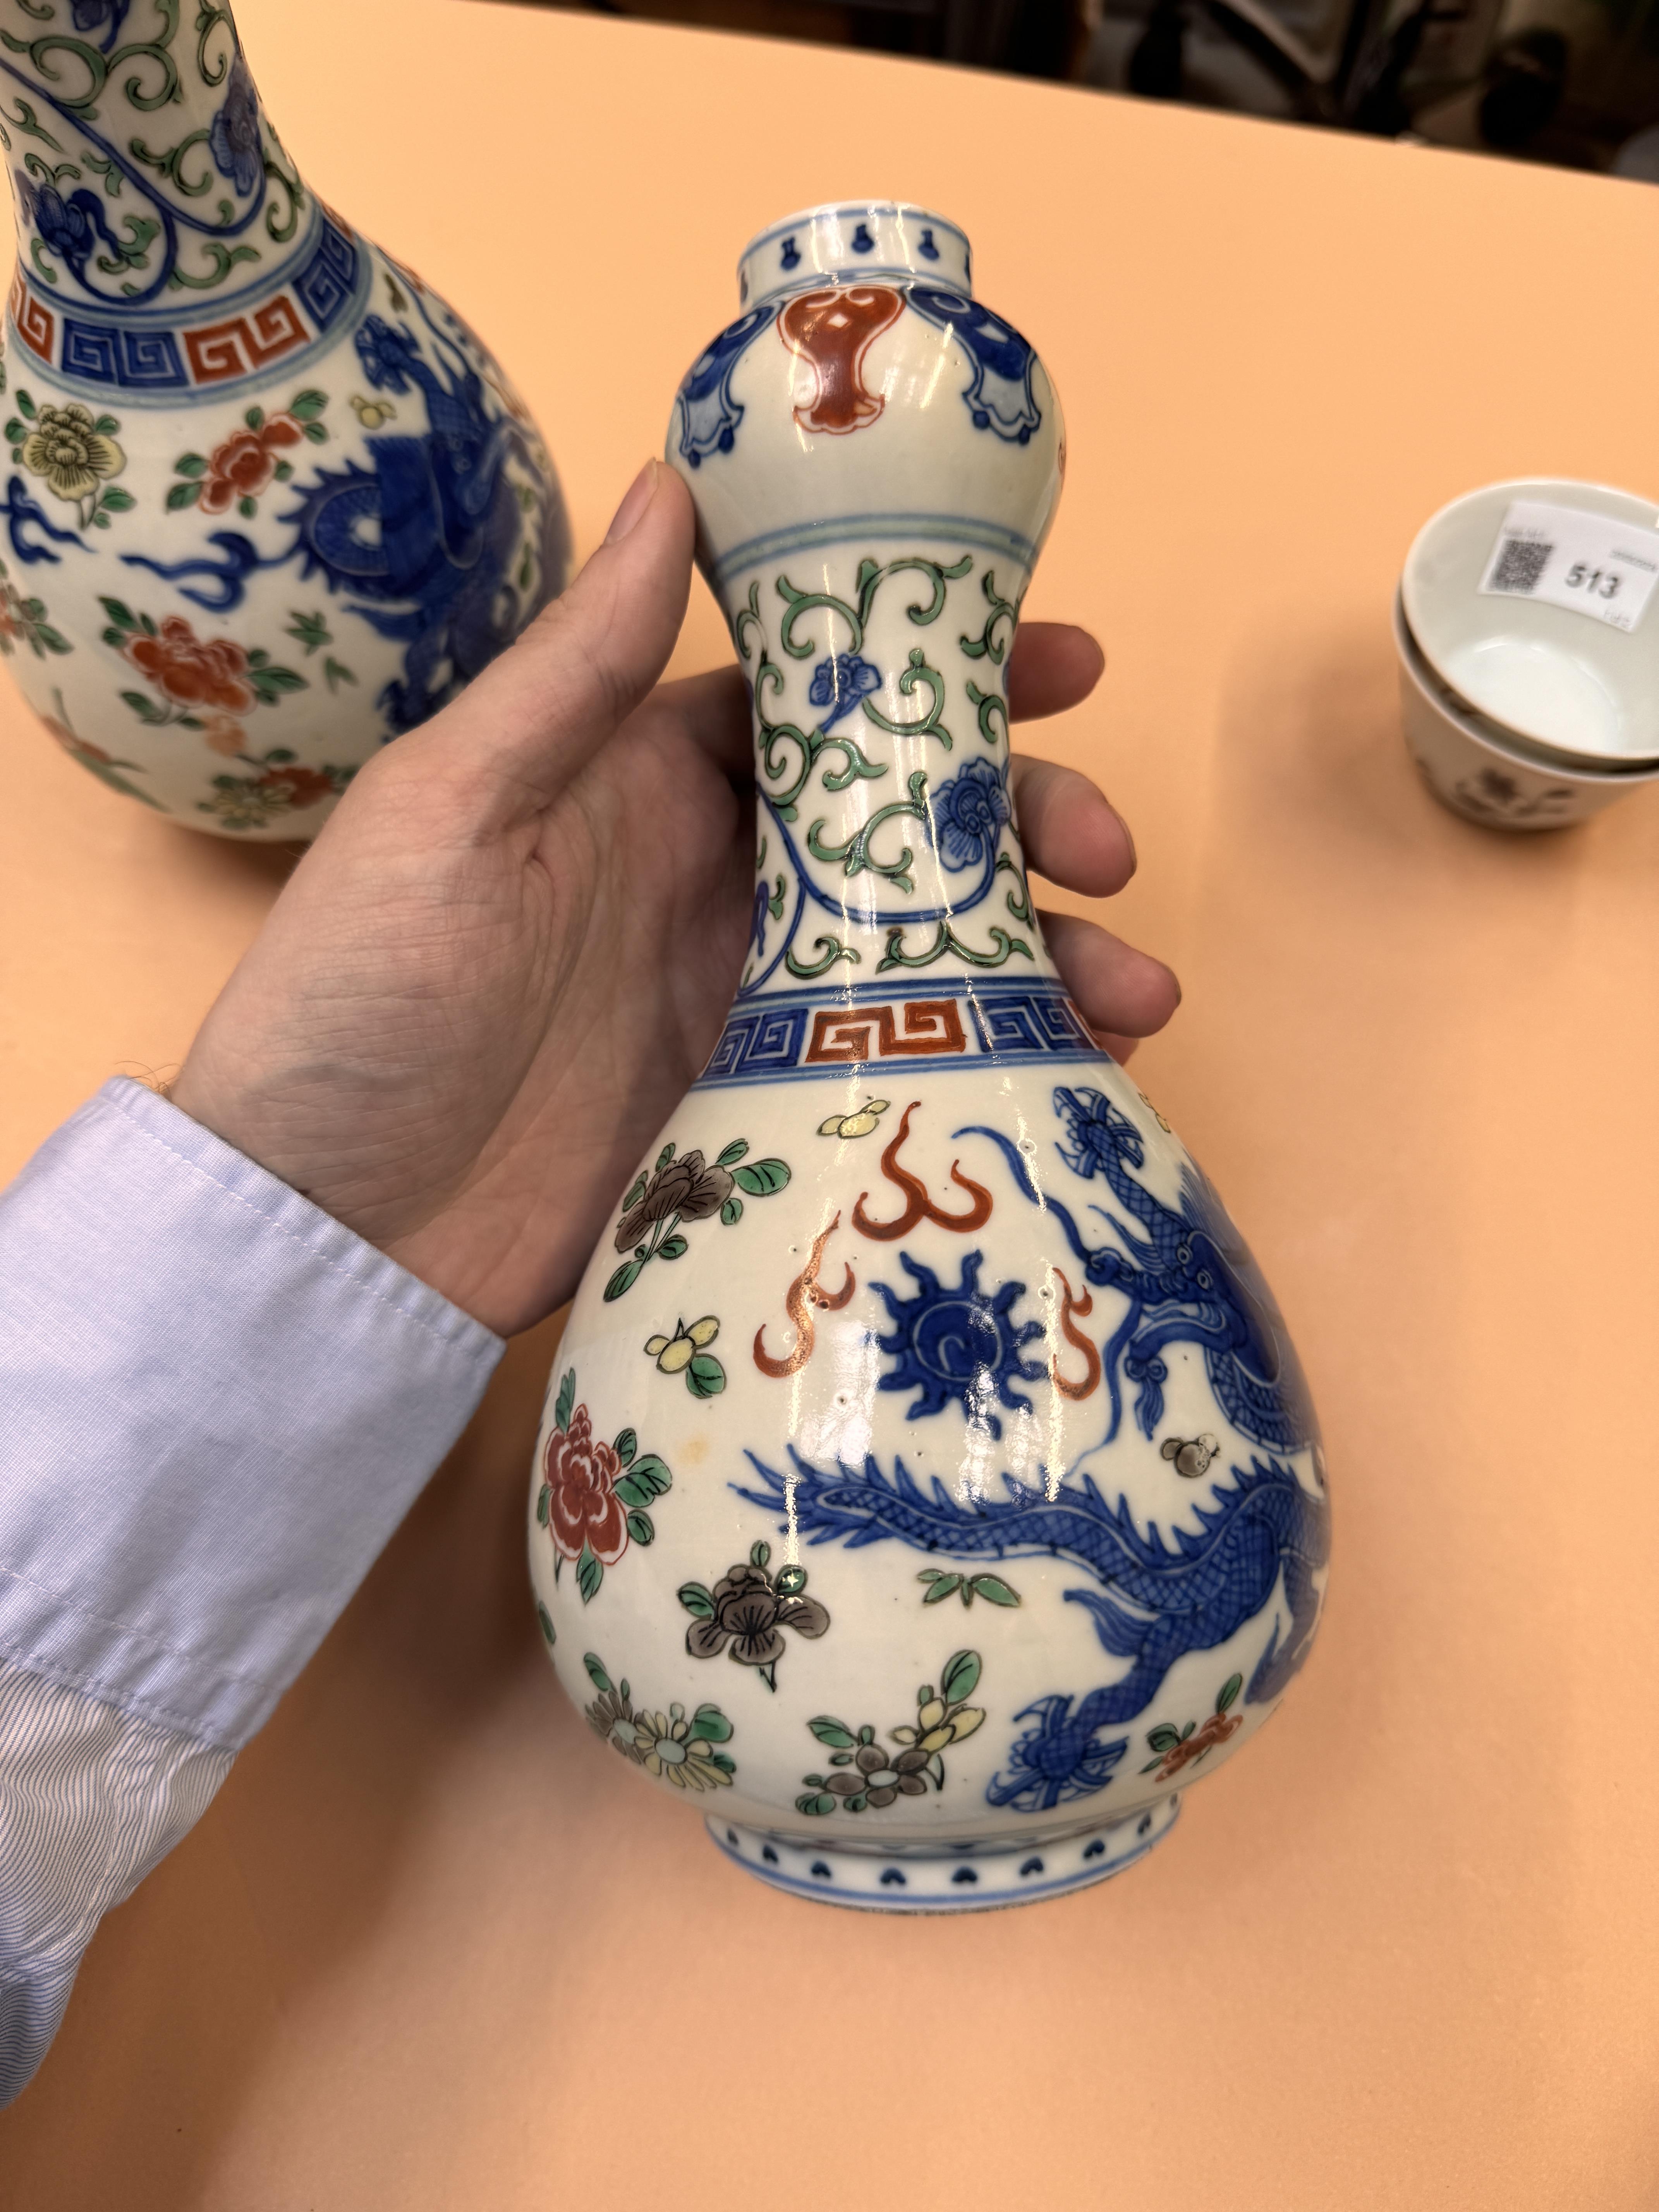 A PAIR OF CHINESE WUCAI 'DRAGON' VASES 民國時期 五彩龍趕珠紋瓶一對 《大明嘉靖年製》款 - Image 13 of 19